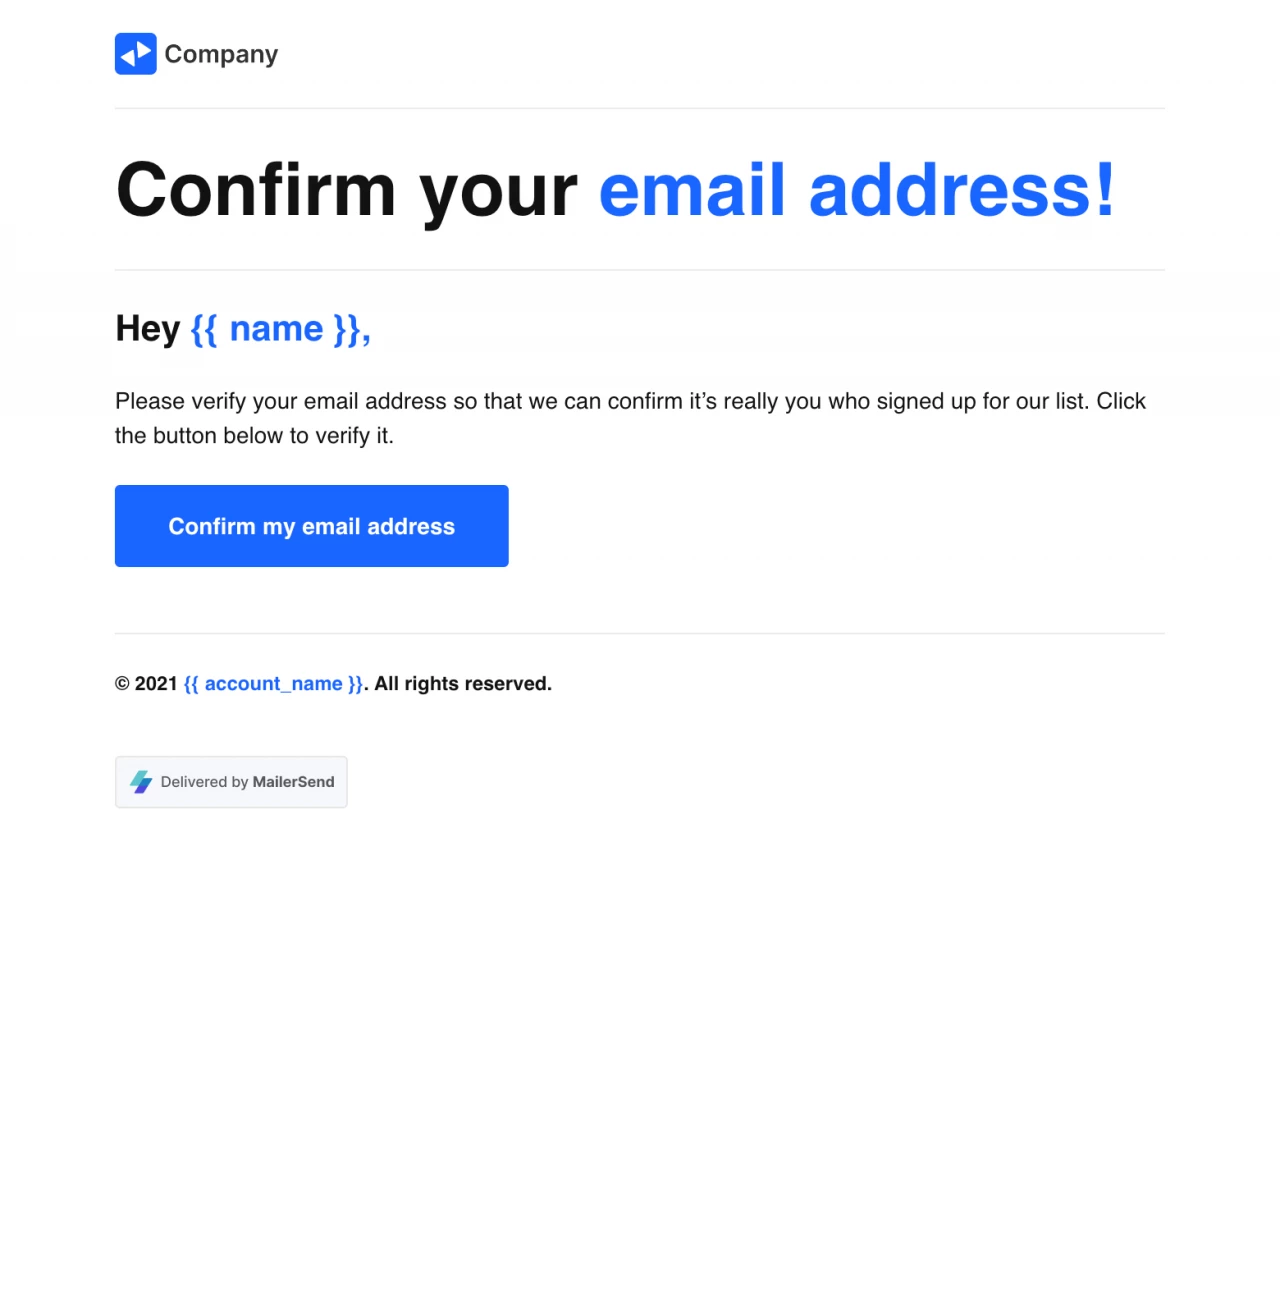 Confirm your email address rich text